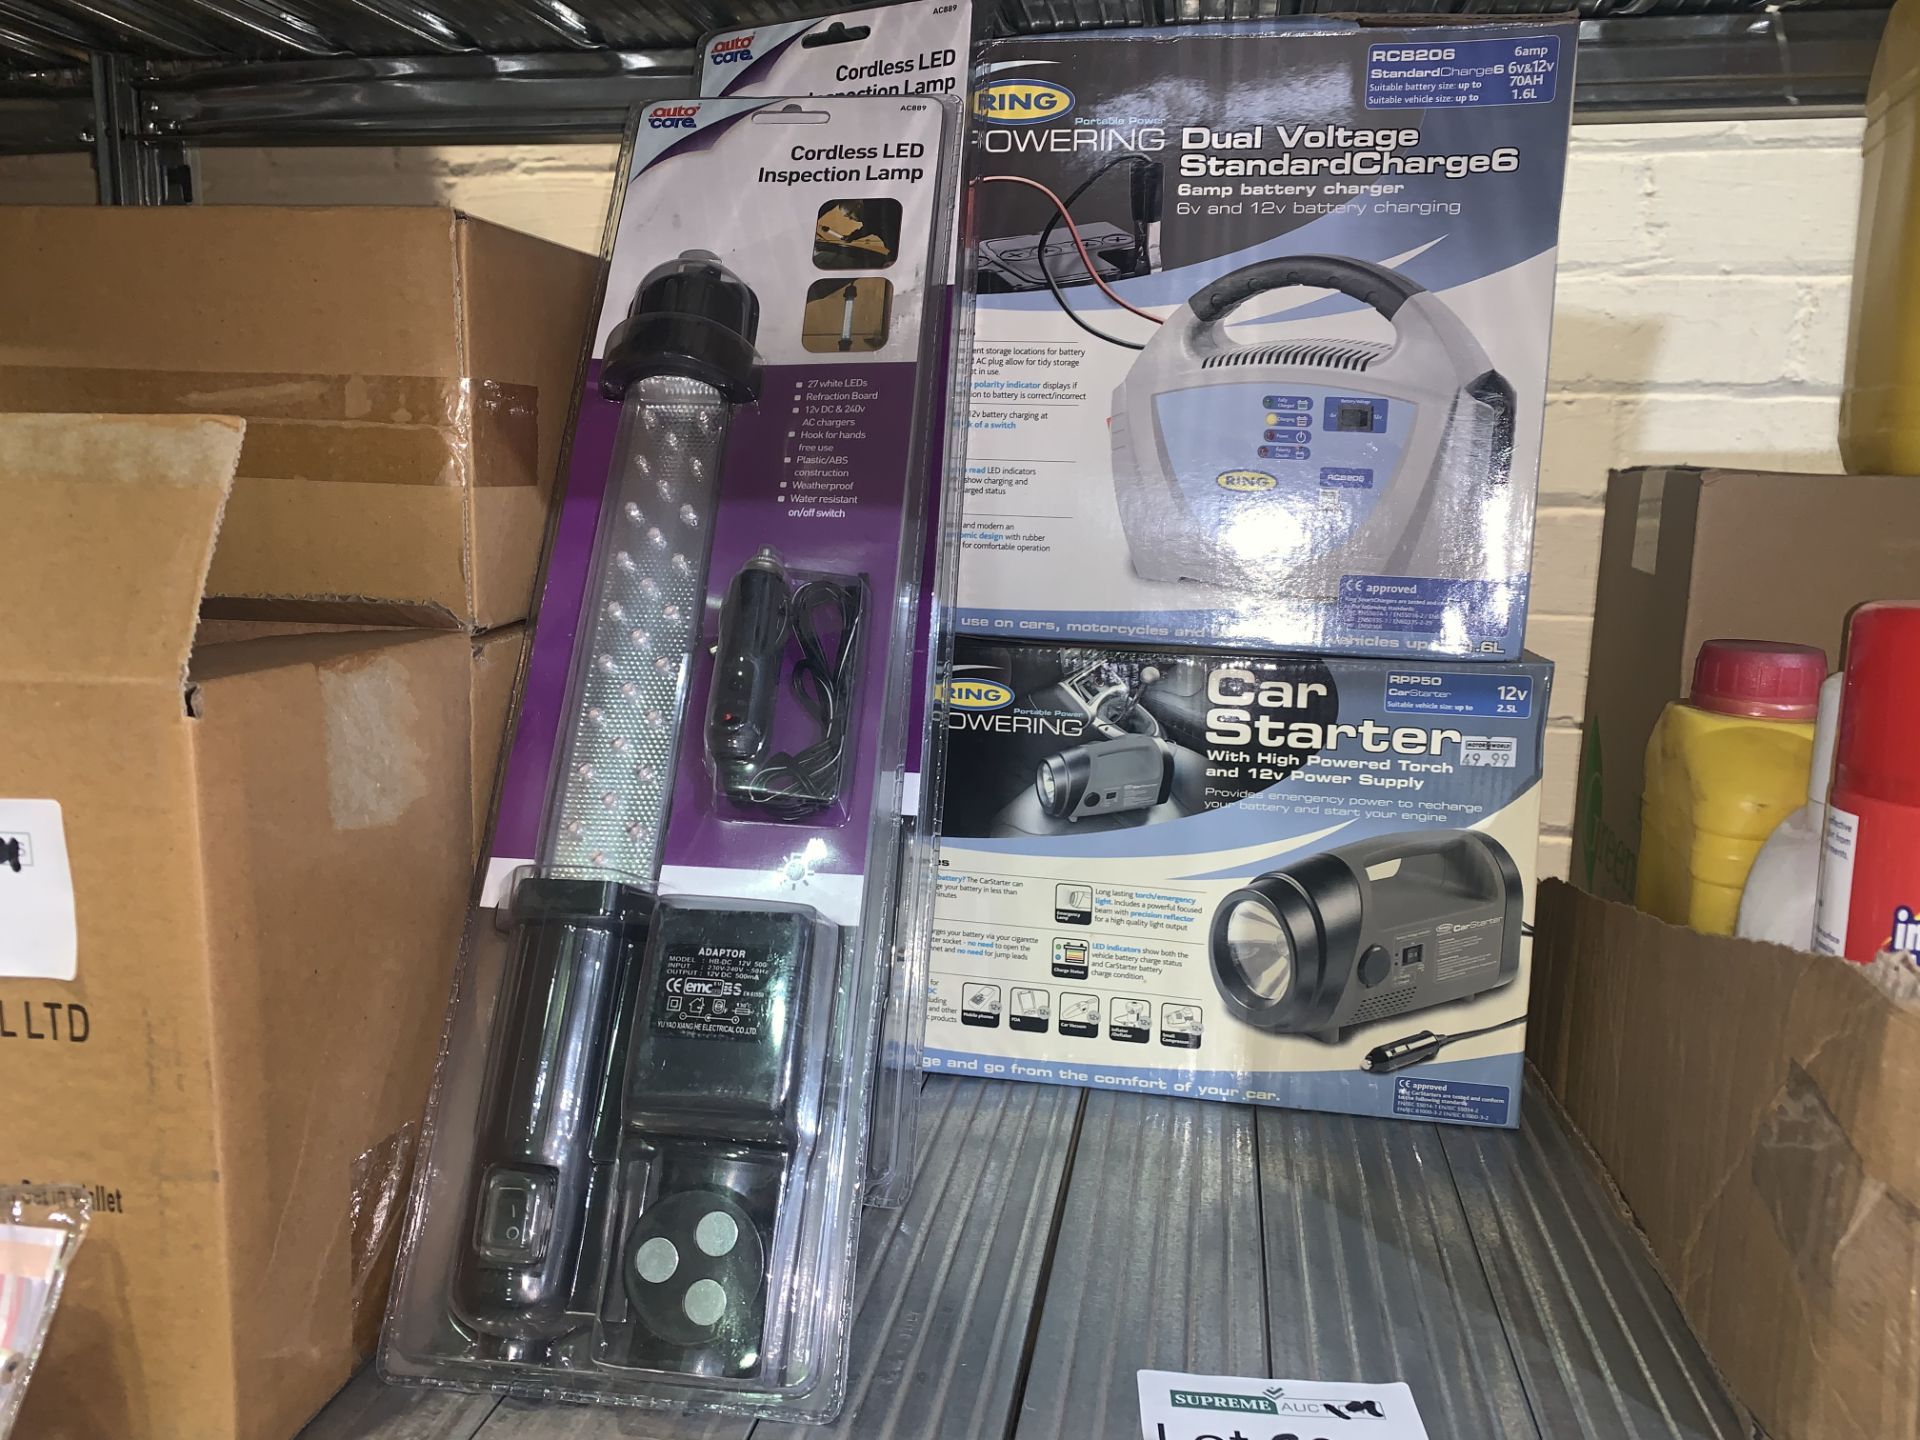 MIXED LOT INCLUDING 2 X CORDLESS LED INSPECTION LAMPS, 1 X RING DUAL VOLTAGE STANDARD CHARGE 6 AND 1